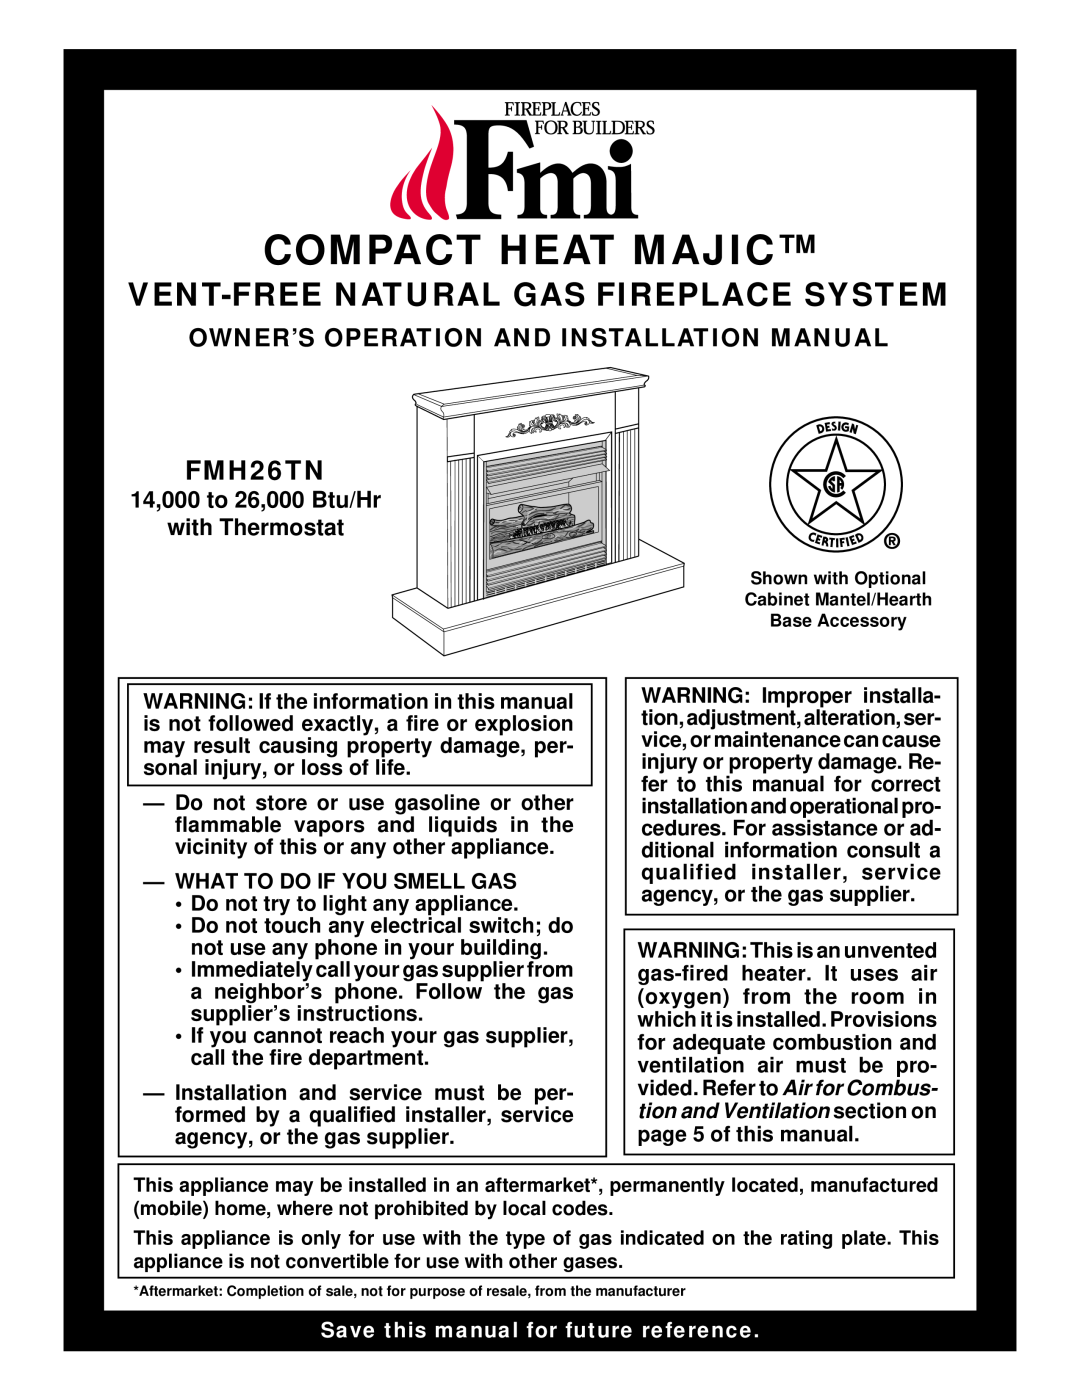 FMI FMH26TN installation manual Vent-Freenatural Gas Fireplace System, What To Do If You Smell Gas, Compact Heat Majic 